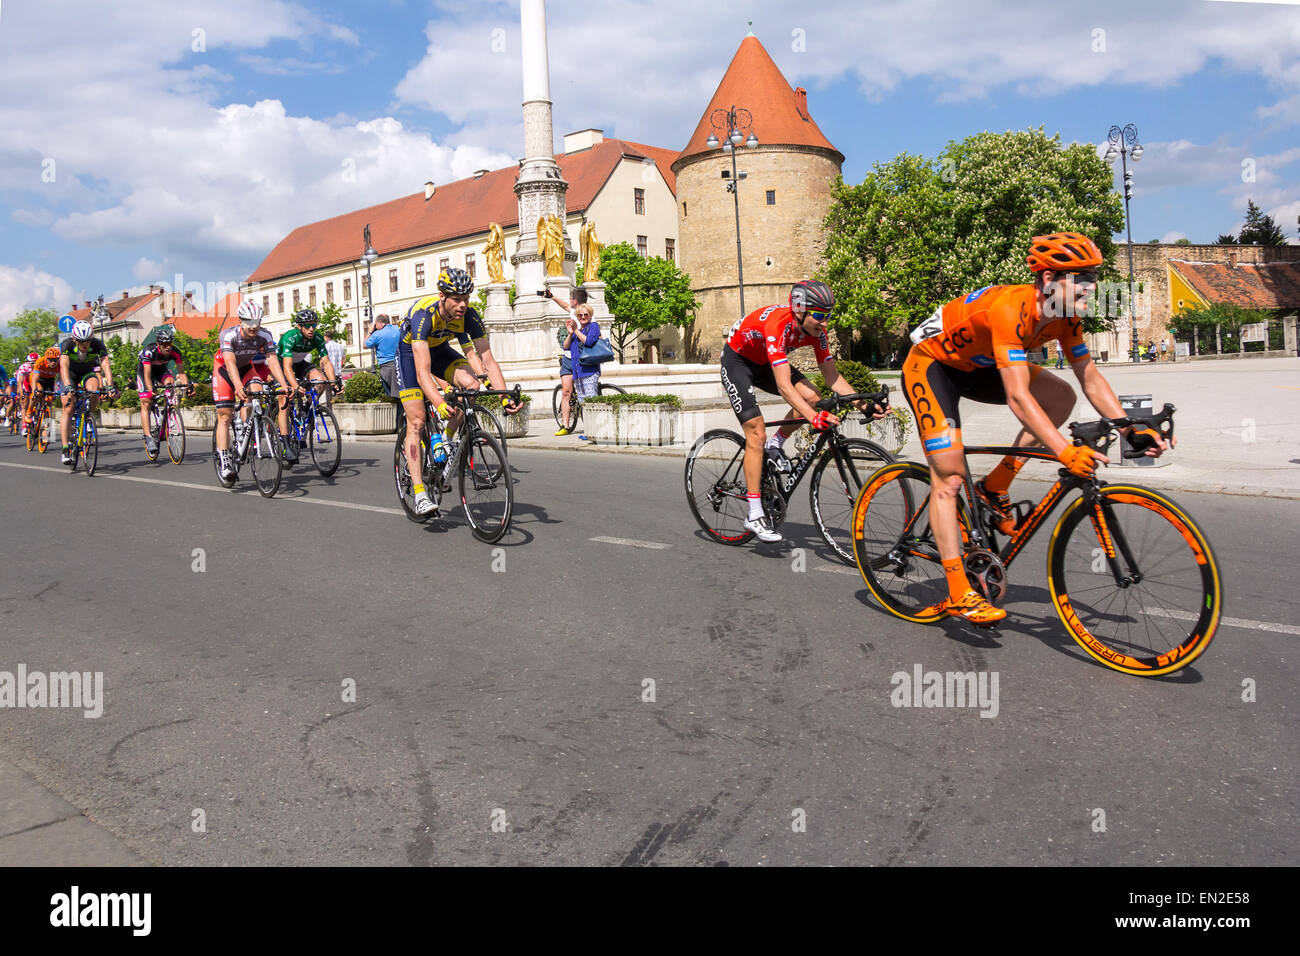 Zagreb, Croatia - April 26, 2015: The final stage of cycling race Tour of Croatia in downtown Zagreb. Stock Photo